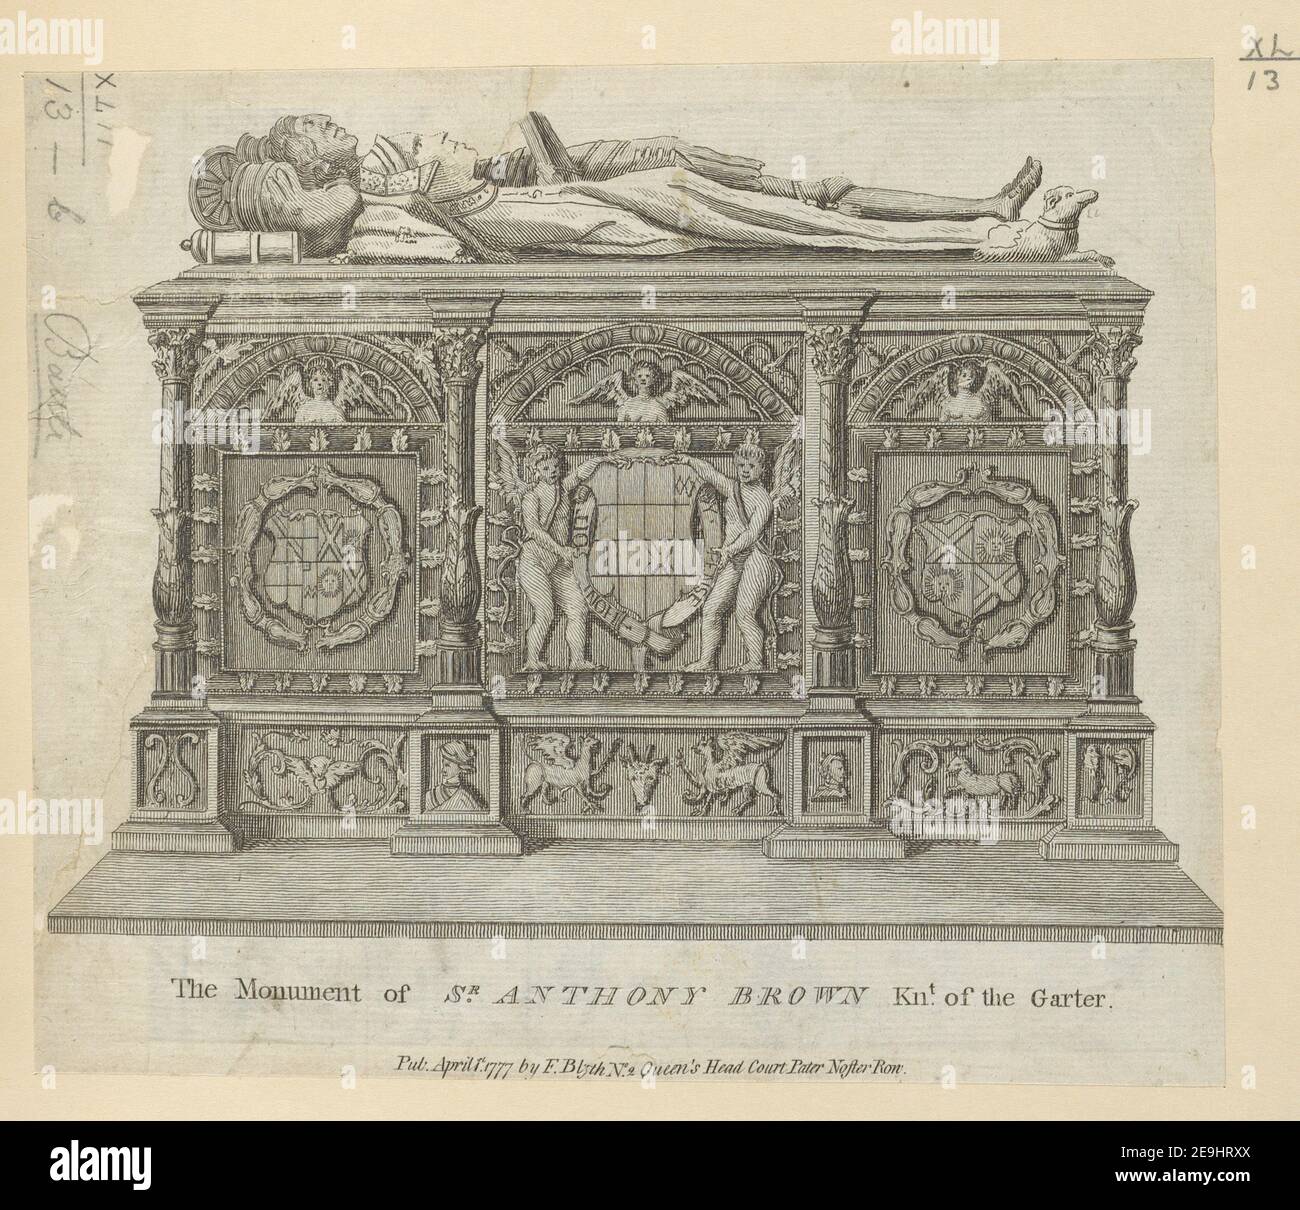 The Monument of S.R ANTHONY BROWN Kn.t of the Garter. Visual Material information:  Title: The Monument of S.R ANTHONY BROWN Kn.t of the Garter. 42.13.b. Place of publication: [London] Publisher: Pub. April 1.st 1777 by F. Blyth No.2 Queen's Head Court Pater Noster Row., Date of publication: [1777]  Item type: 1 print Medium: etching Dimensions: sheet 17.2 x 20.1 cm [trimmed within platemark]  Former owner: George III, King of Great Britain, 1738-1820 Stock Photo